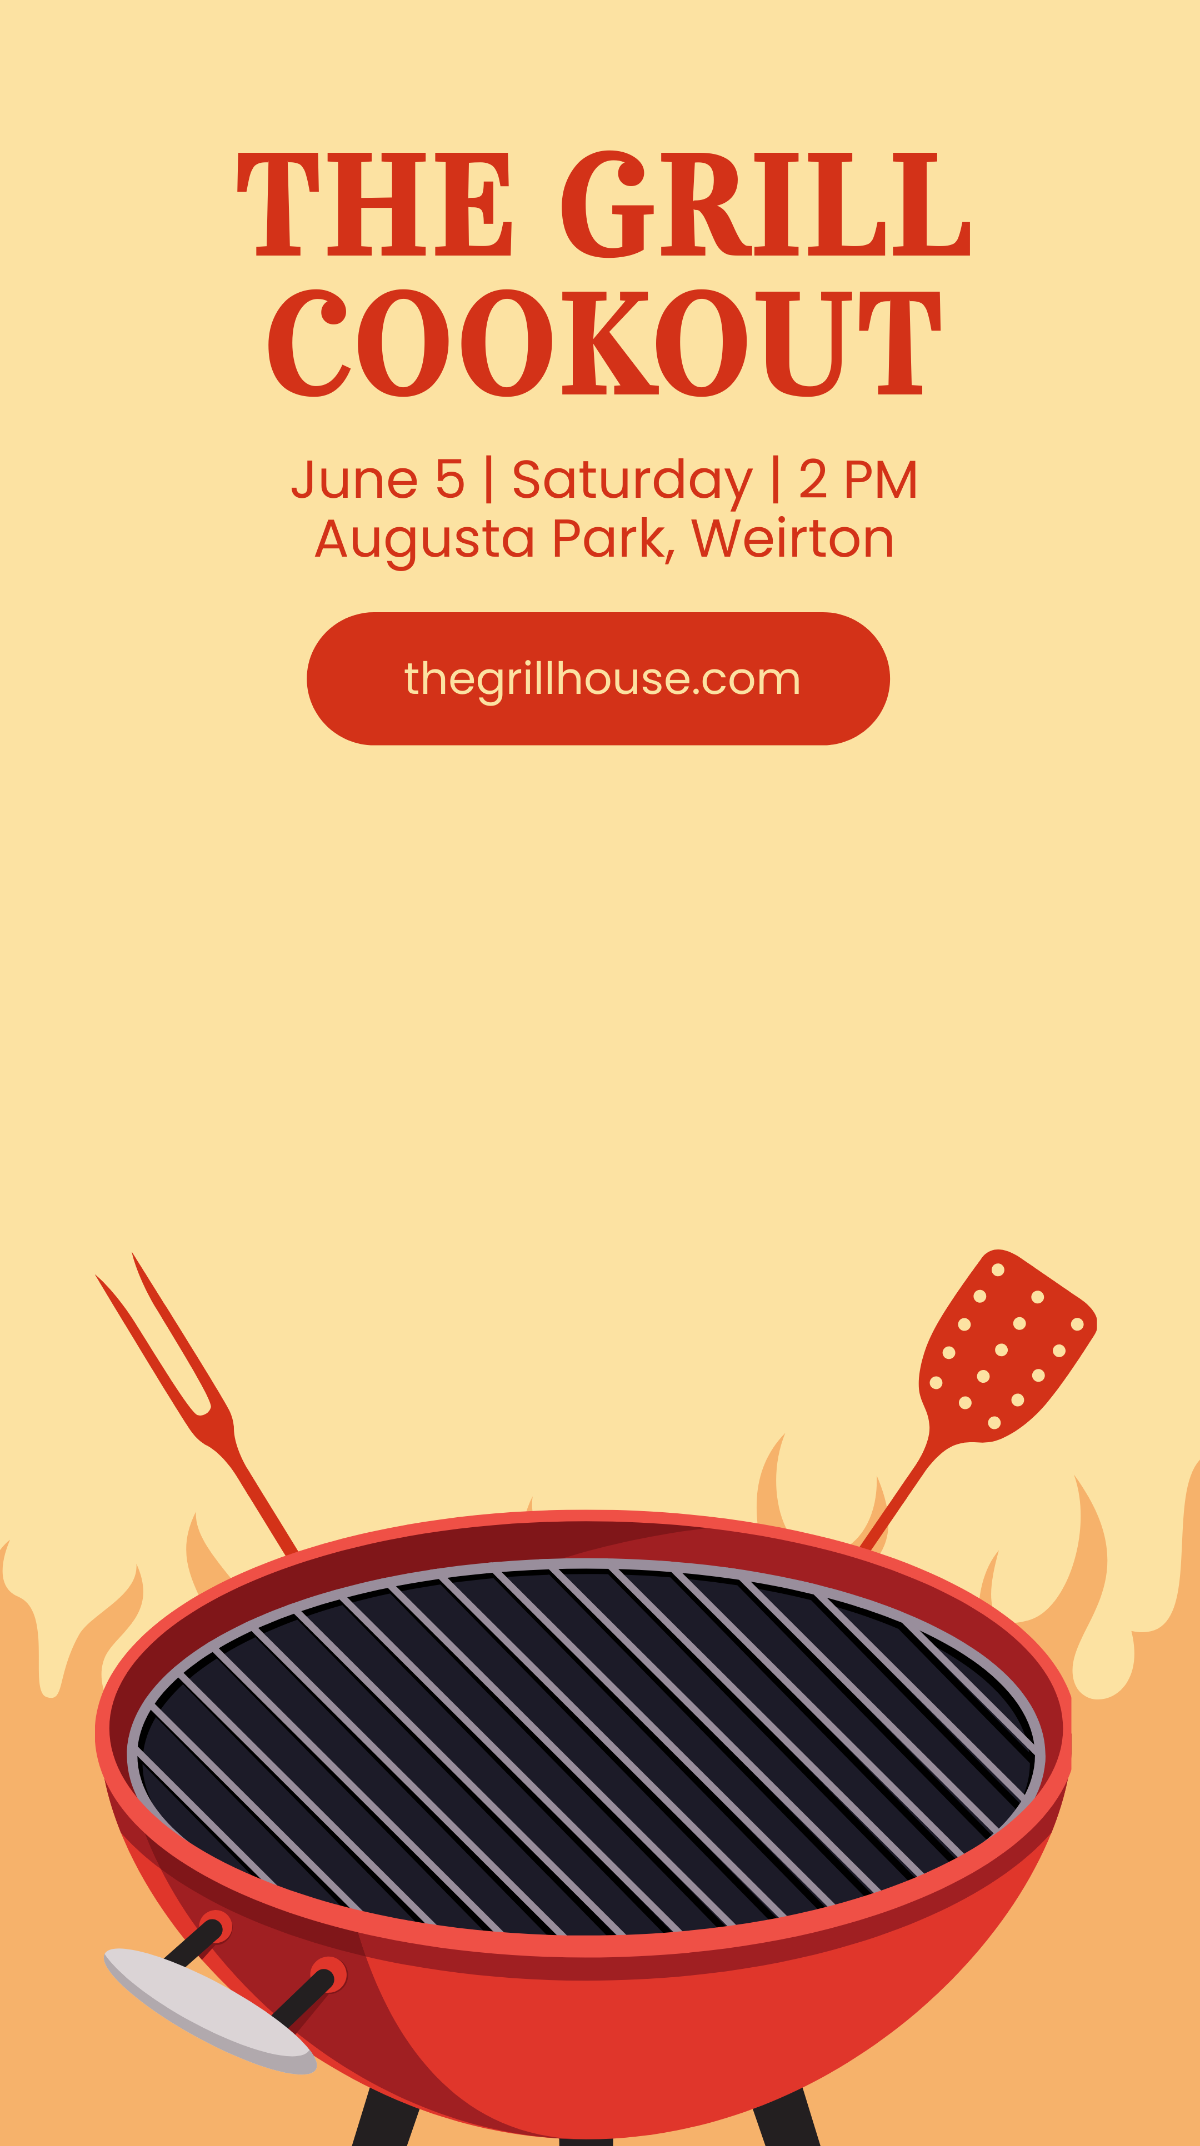 Free Grill Cookout Snapchat Geofilter Template